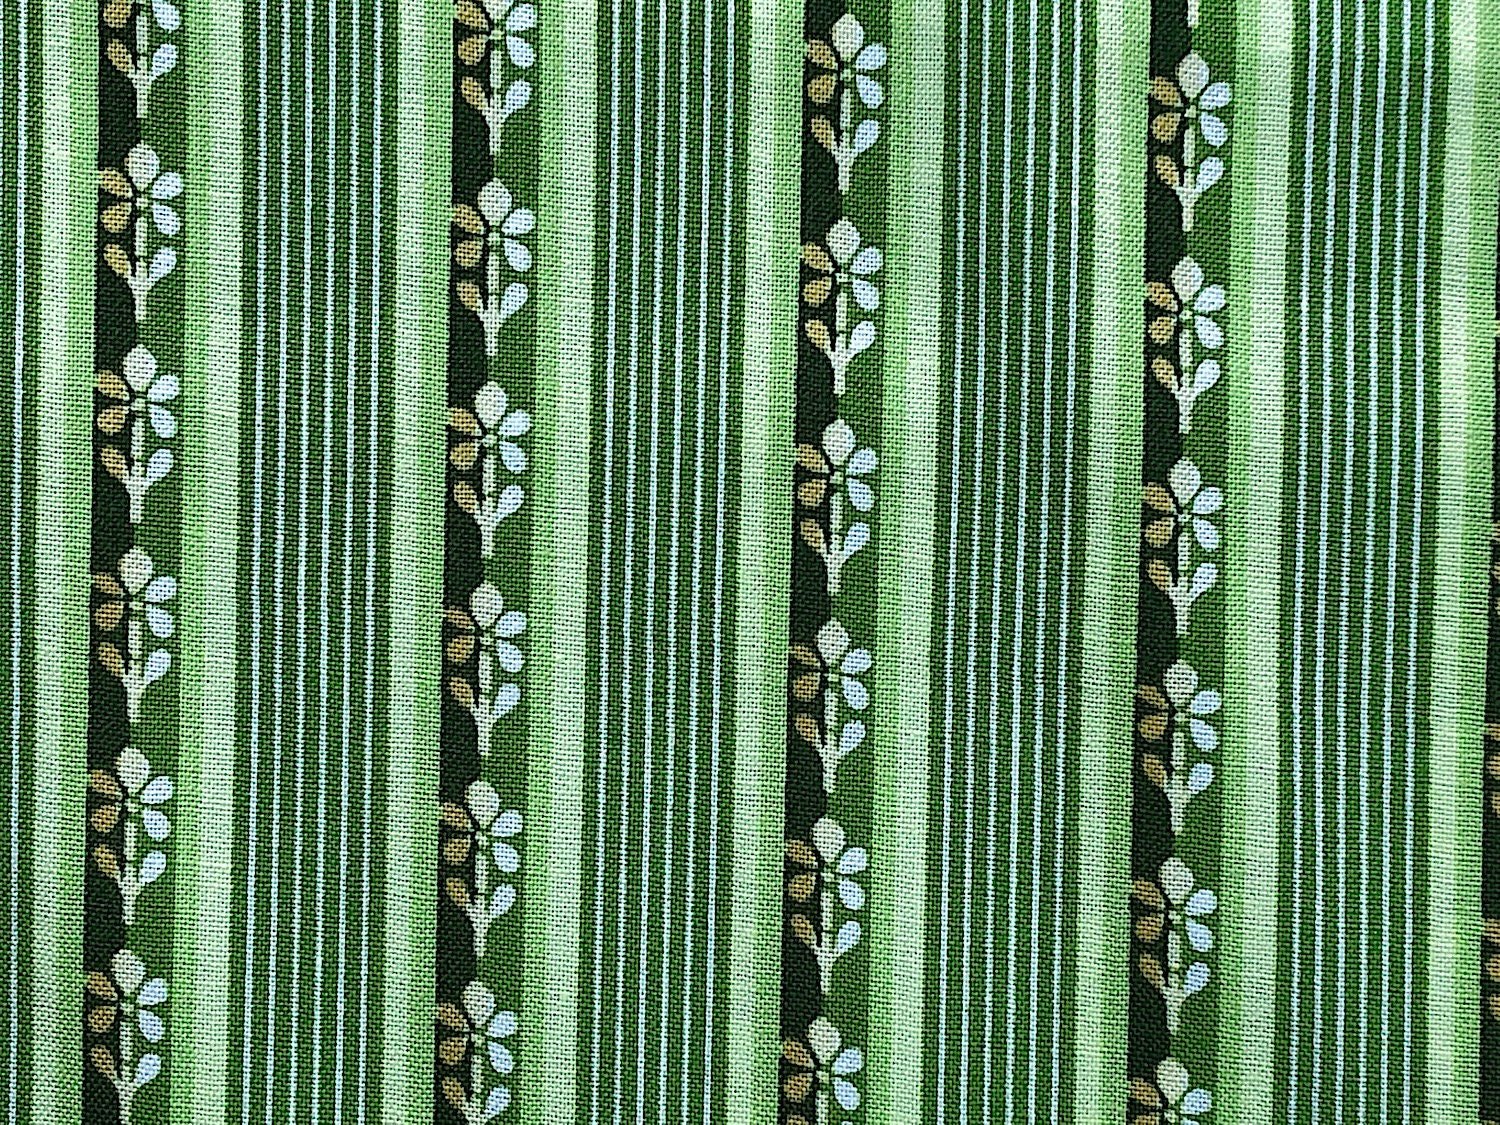 This fabric is part of the Emma's Garden collection and has green stripes with rows of flowers in some of the stripes